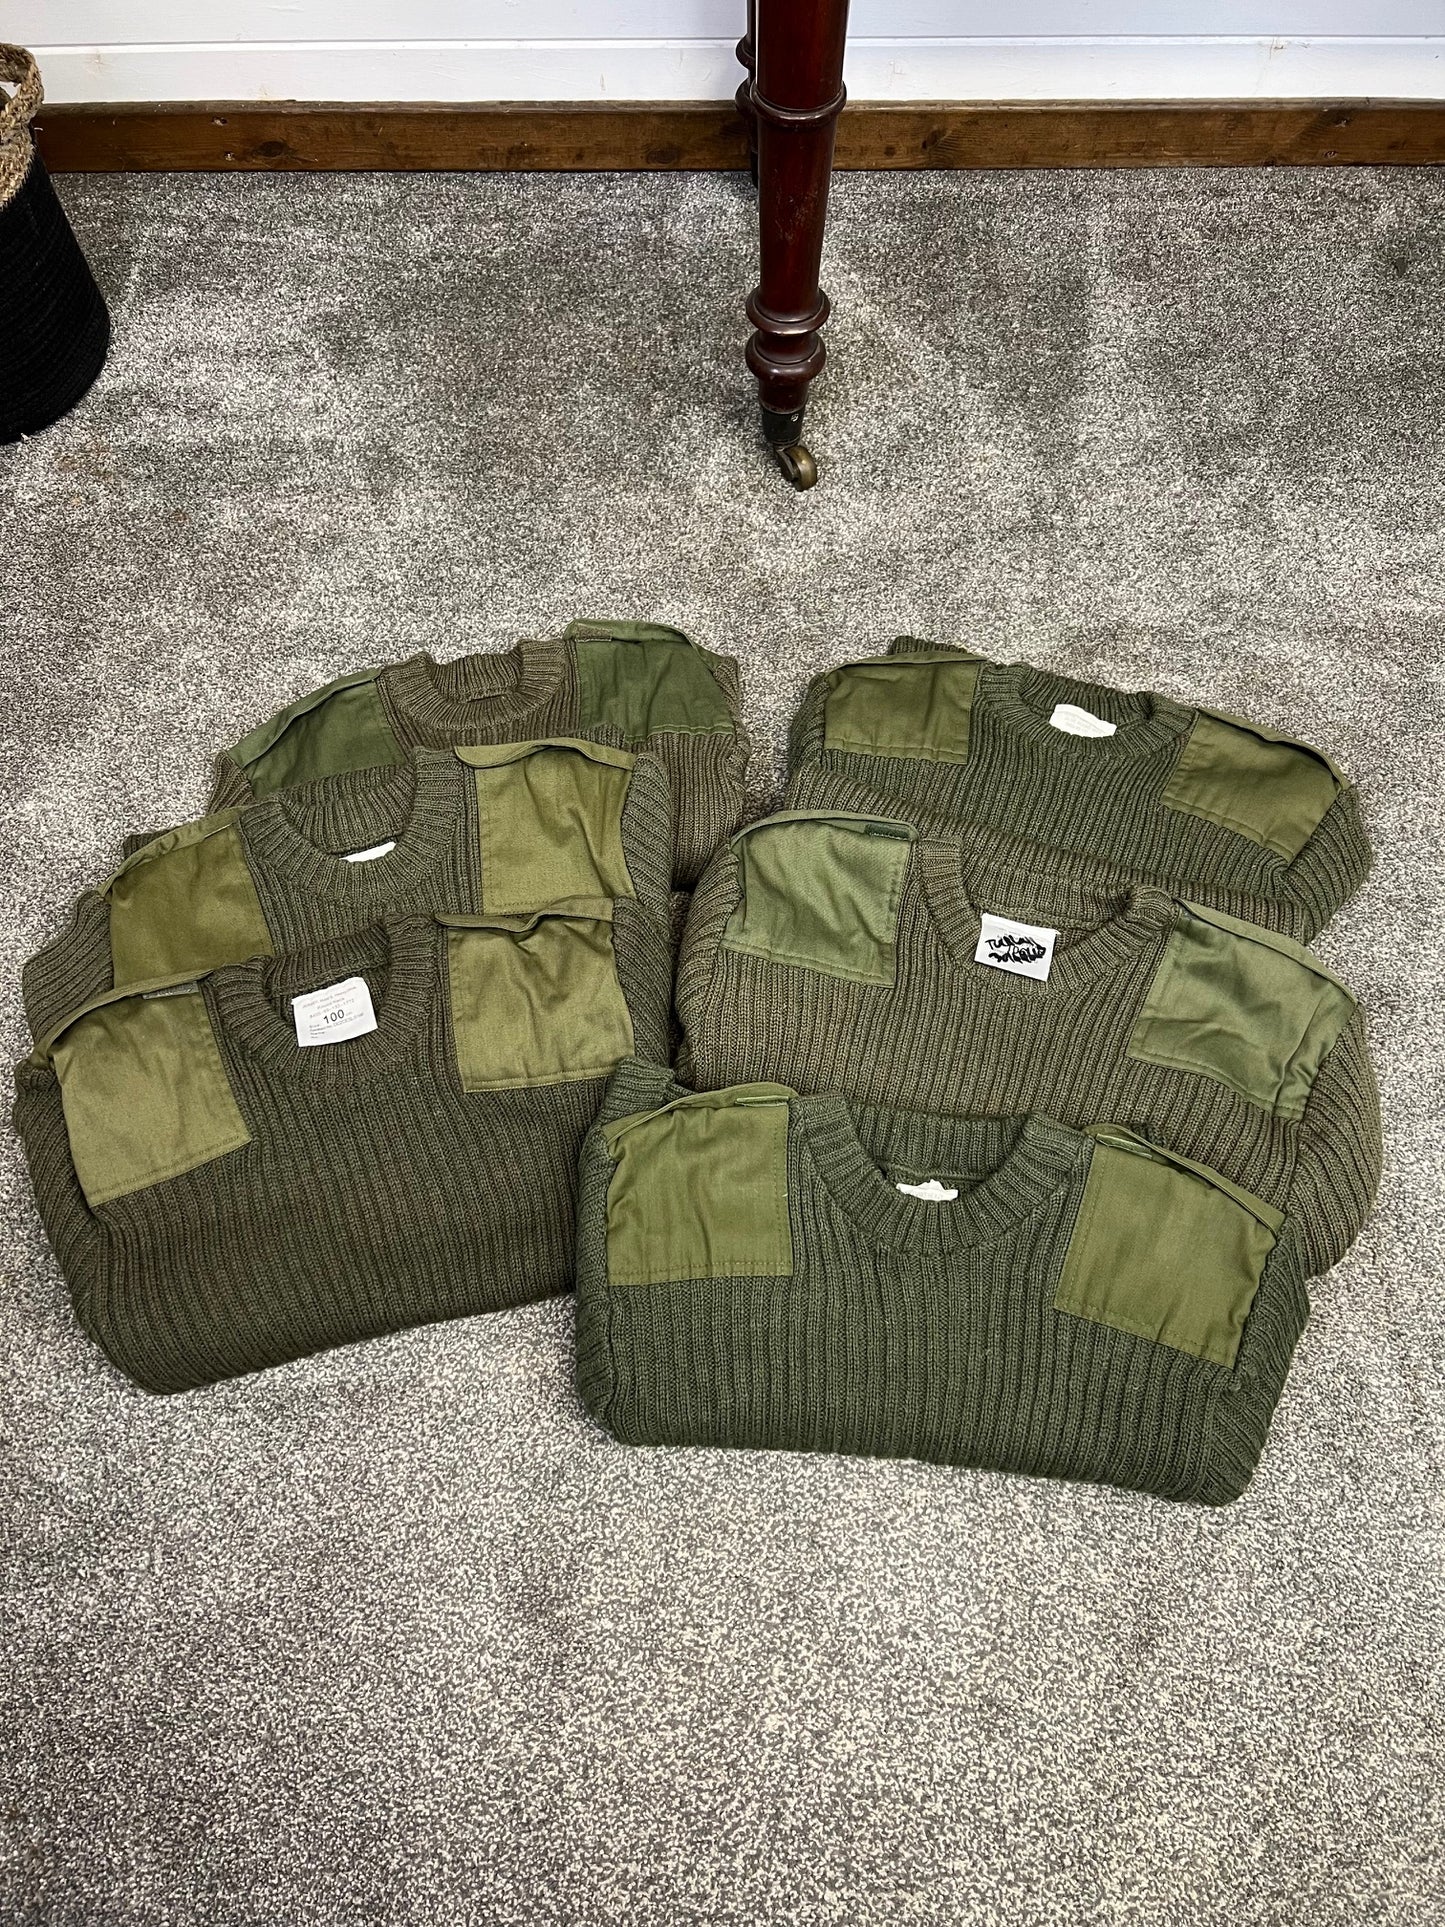 6x Genuine British Army Wool Jumper Military Olive Pullover Job Lot Bundle - Mixed Sizes